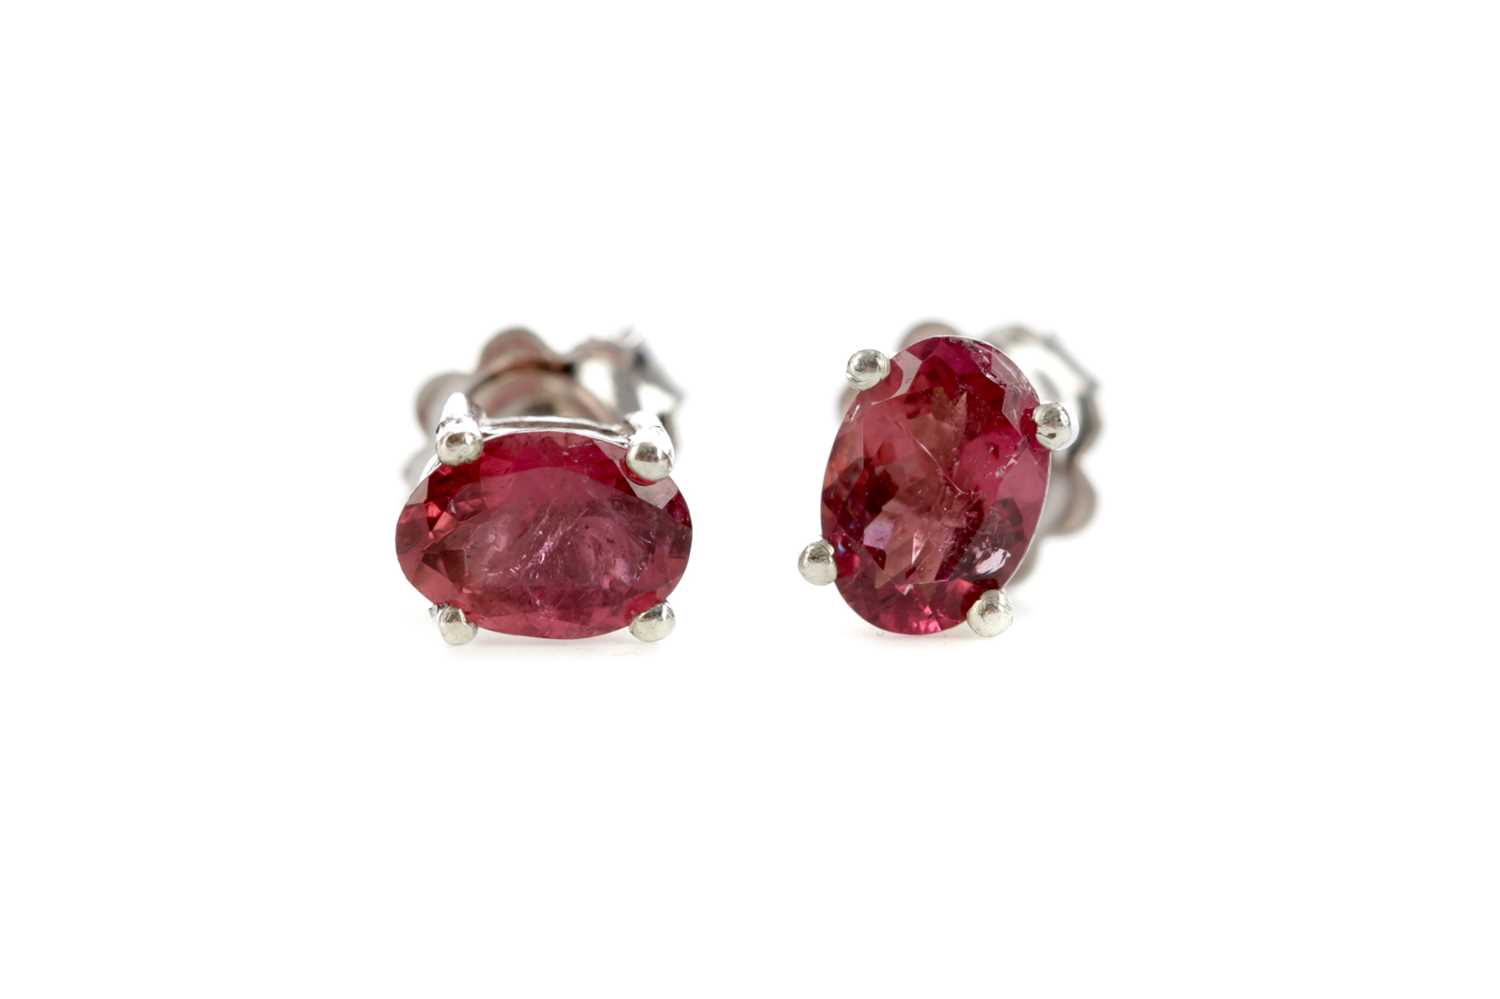 Lot 925 - A PAIR OF PINK TOURMALINE STUD EARRINGS